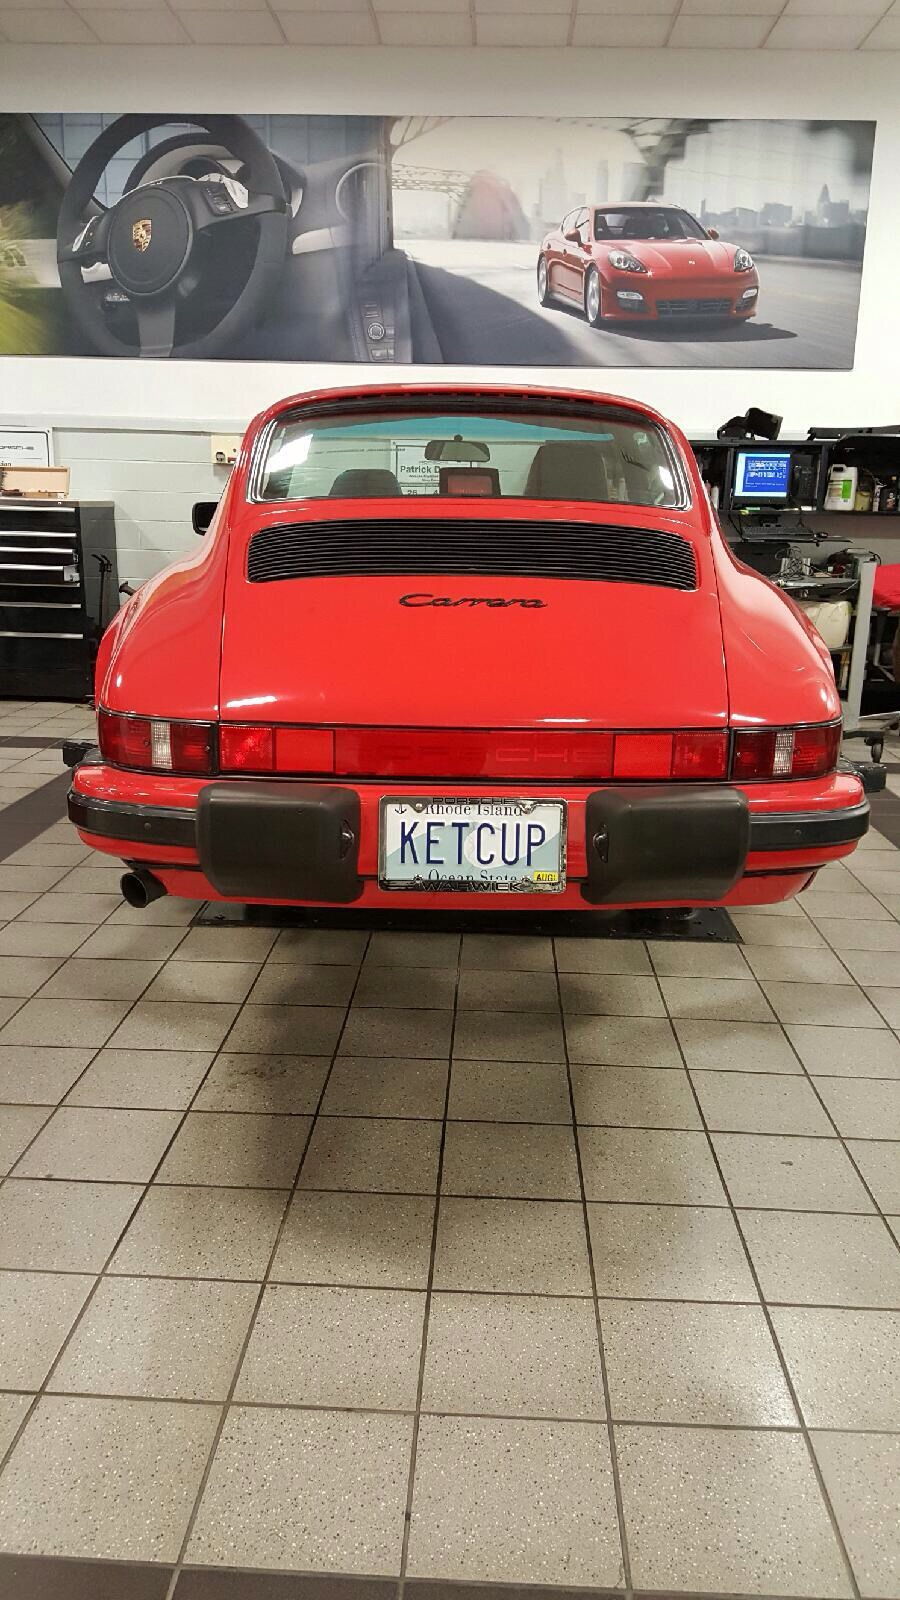 Vanity License Plate ideas for air cooled 911 - Page 4 - Rennlist